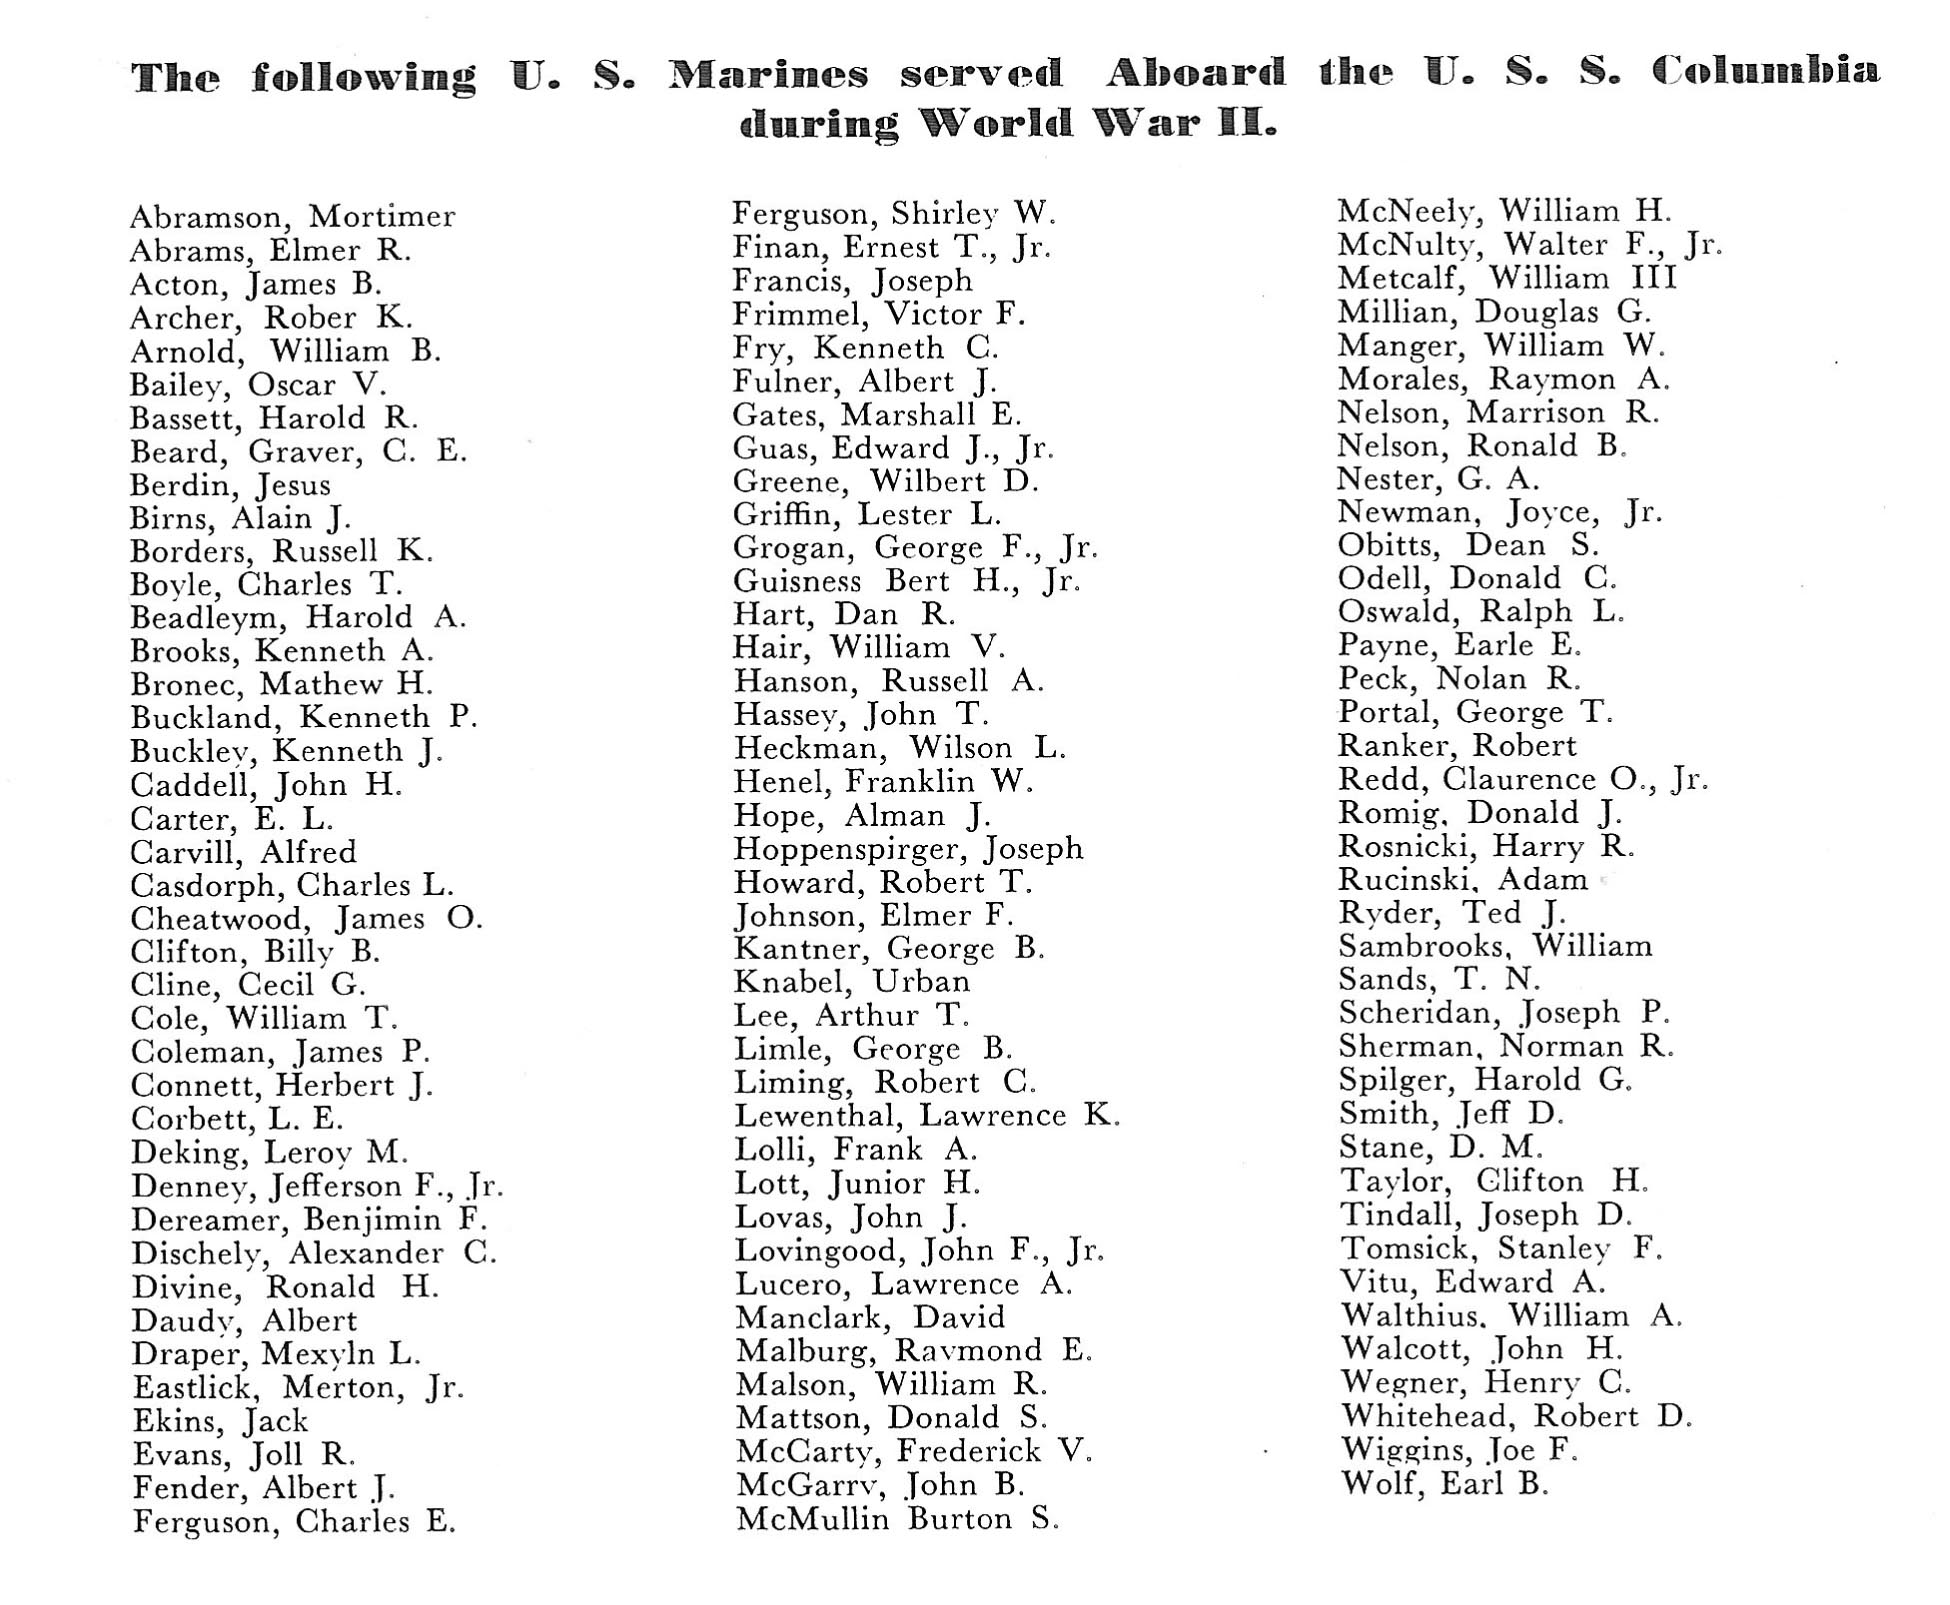 List of Marines that served aboard USS Columbia